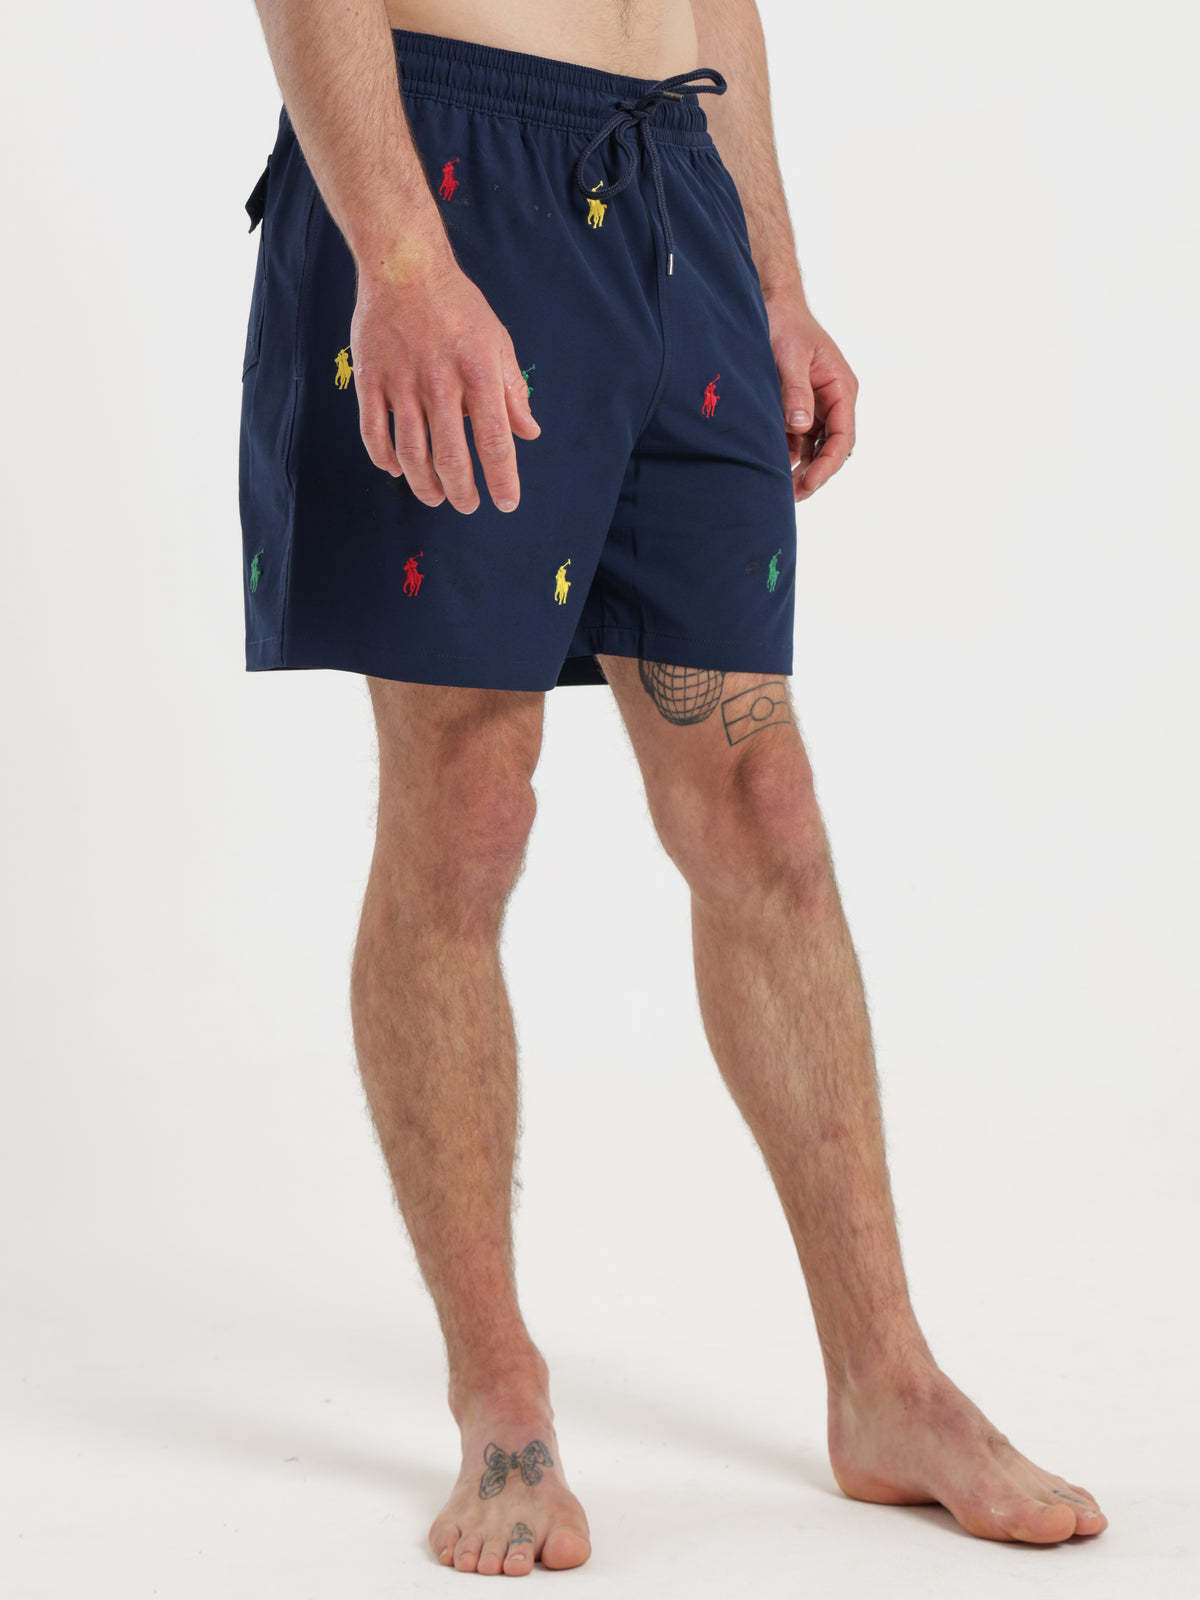 All Over Pony Player Swim Shorts in Newport Navy